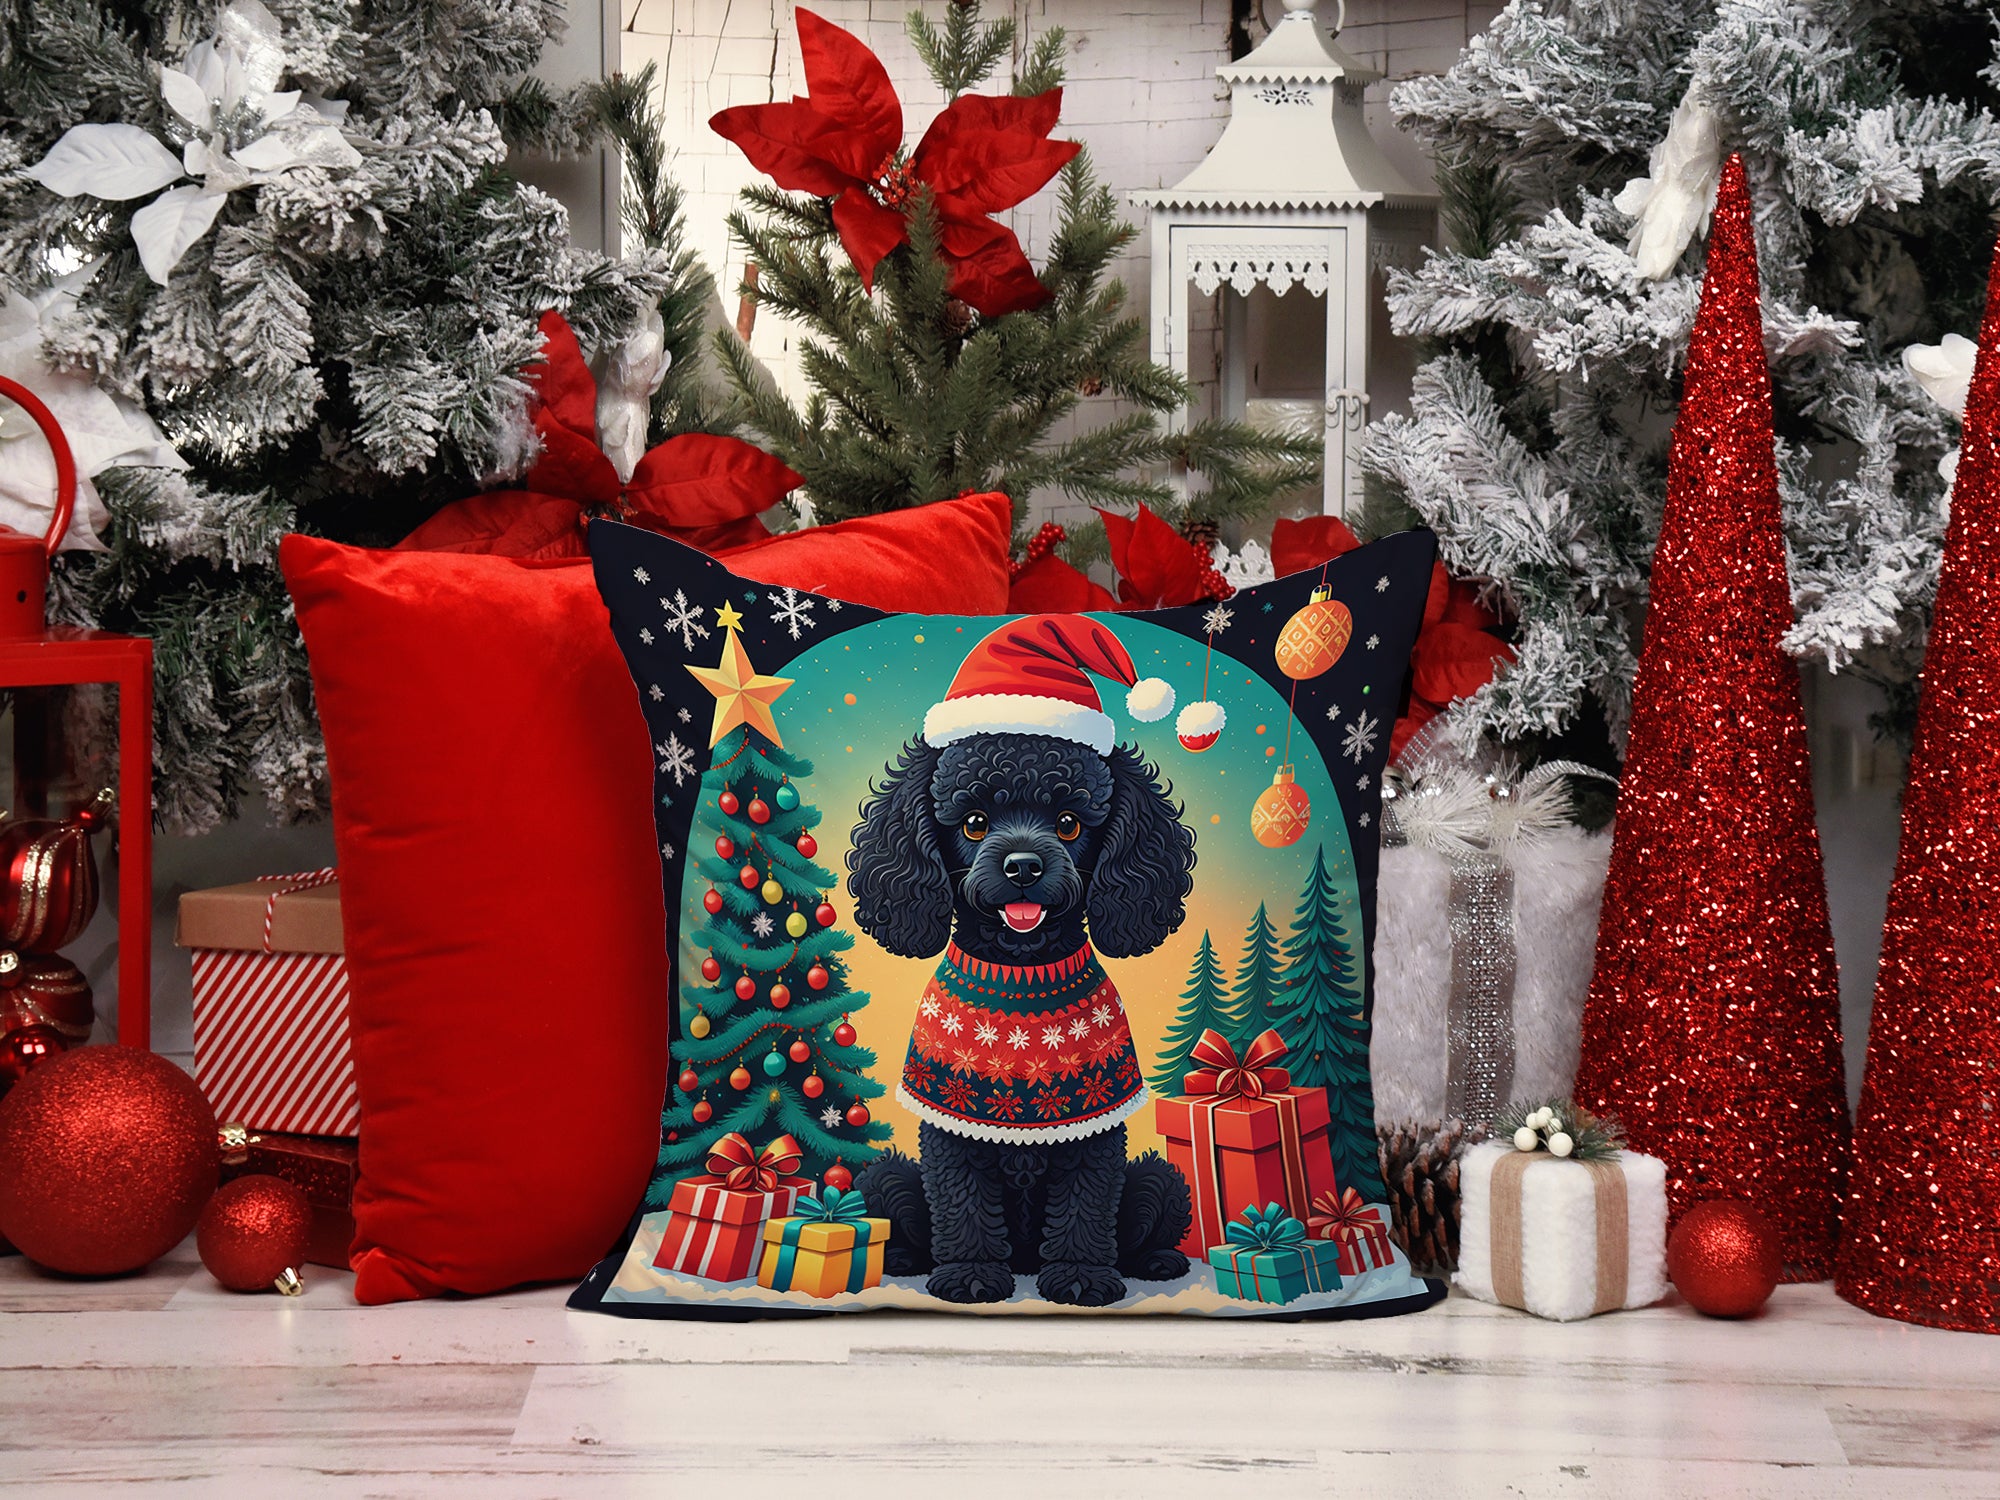 Buy this Black Toy Poodle Christmas Fabric Decorative Pillow